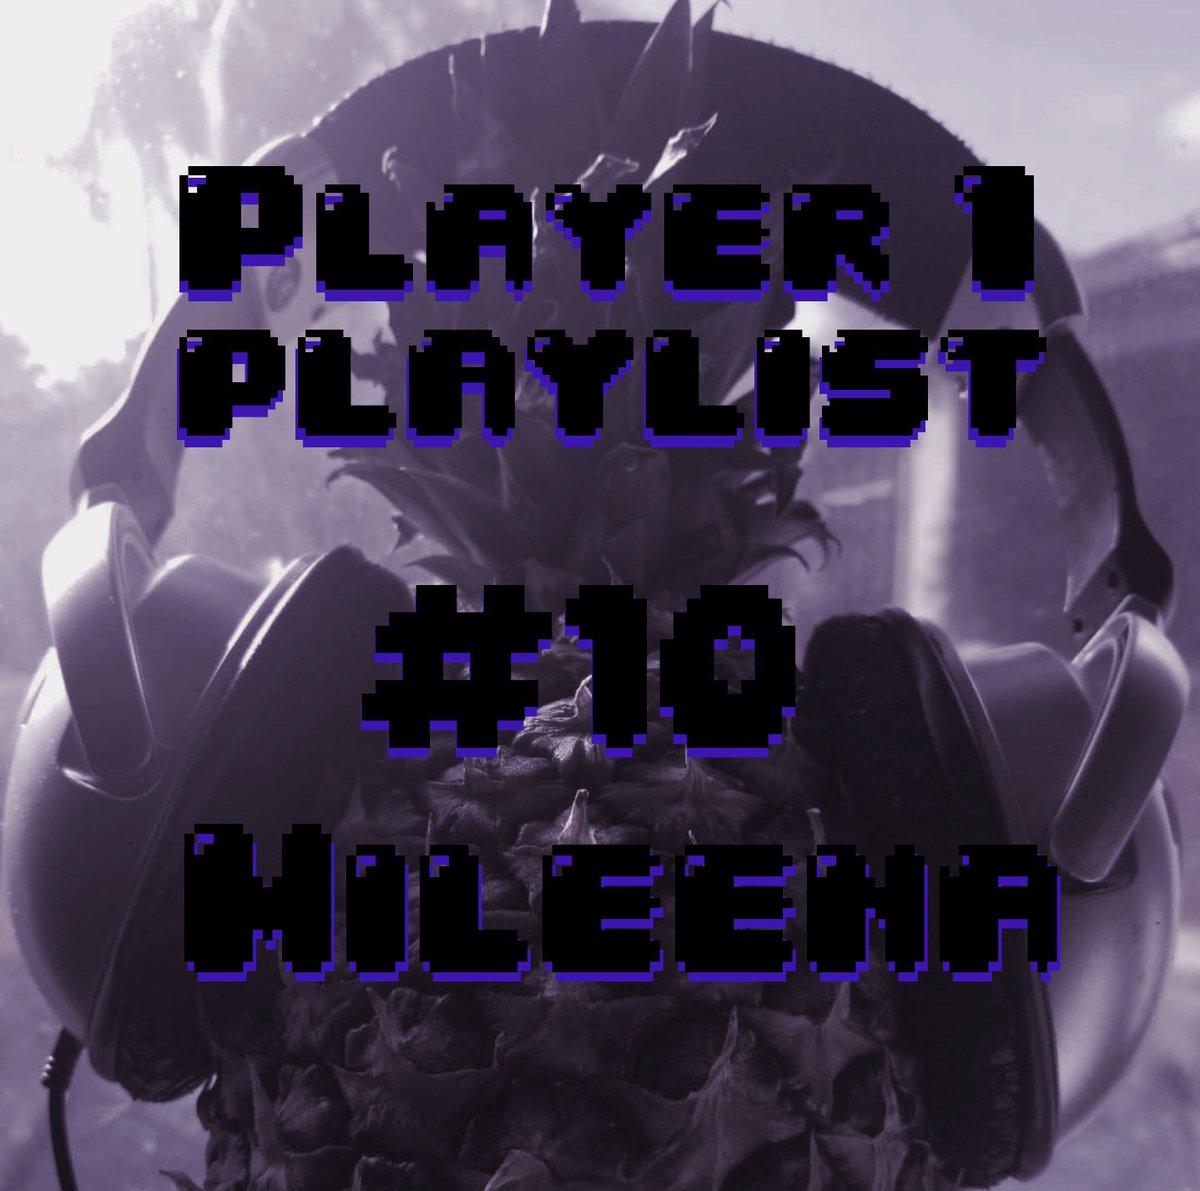 Mileena inspires a BRUTAL musical melee that will FINISH any player!
spotify.link/o4oEr7WDRDb